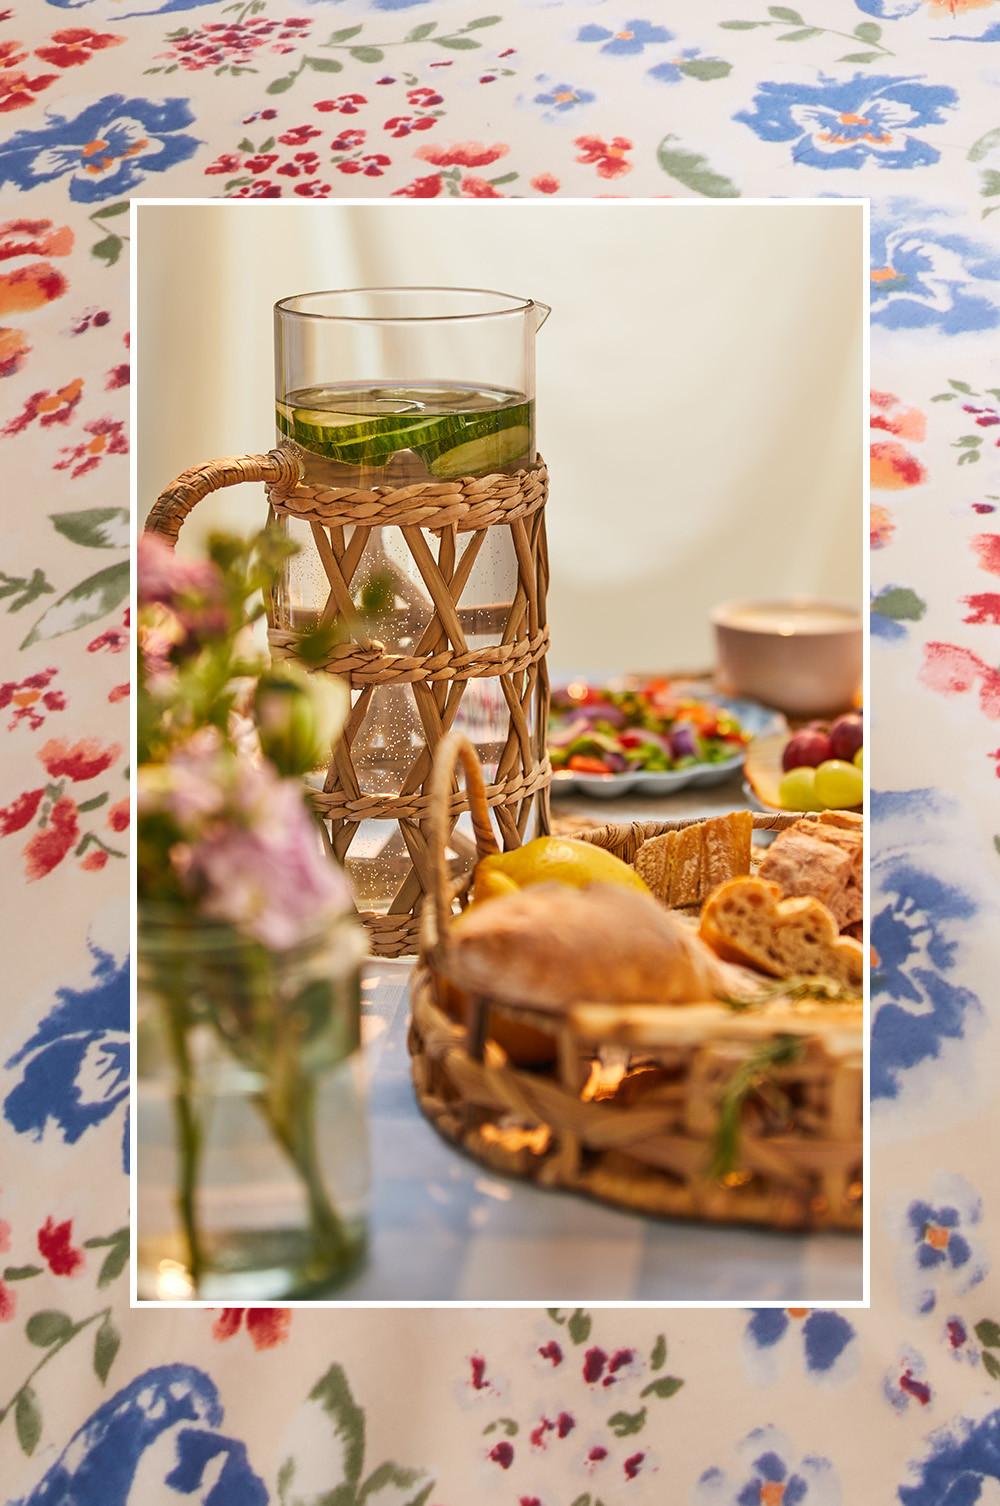 Table with blue gingham tablecloth, rattan baskets, pitchers